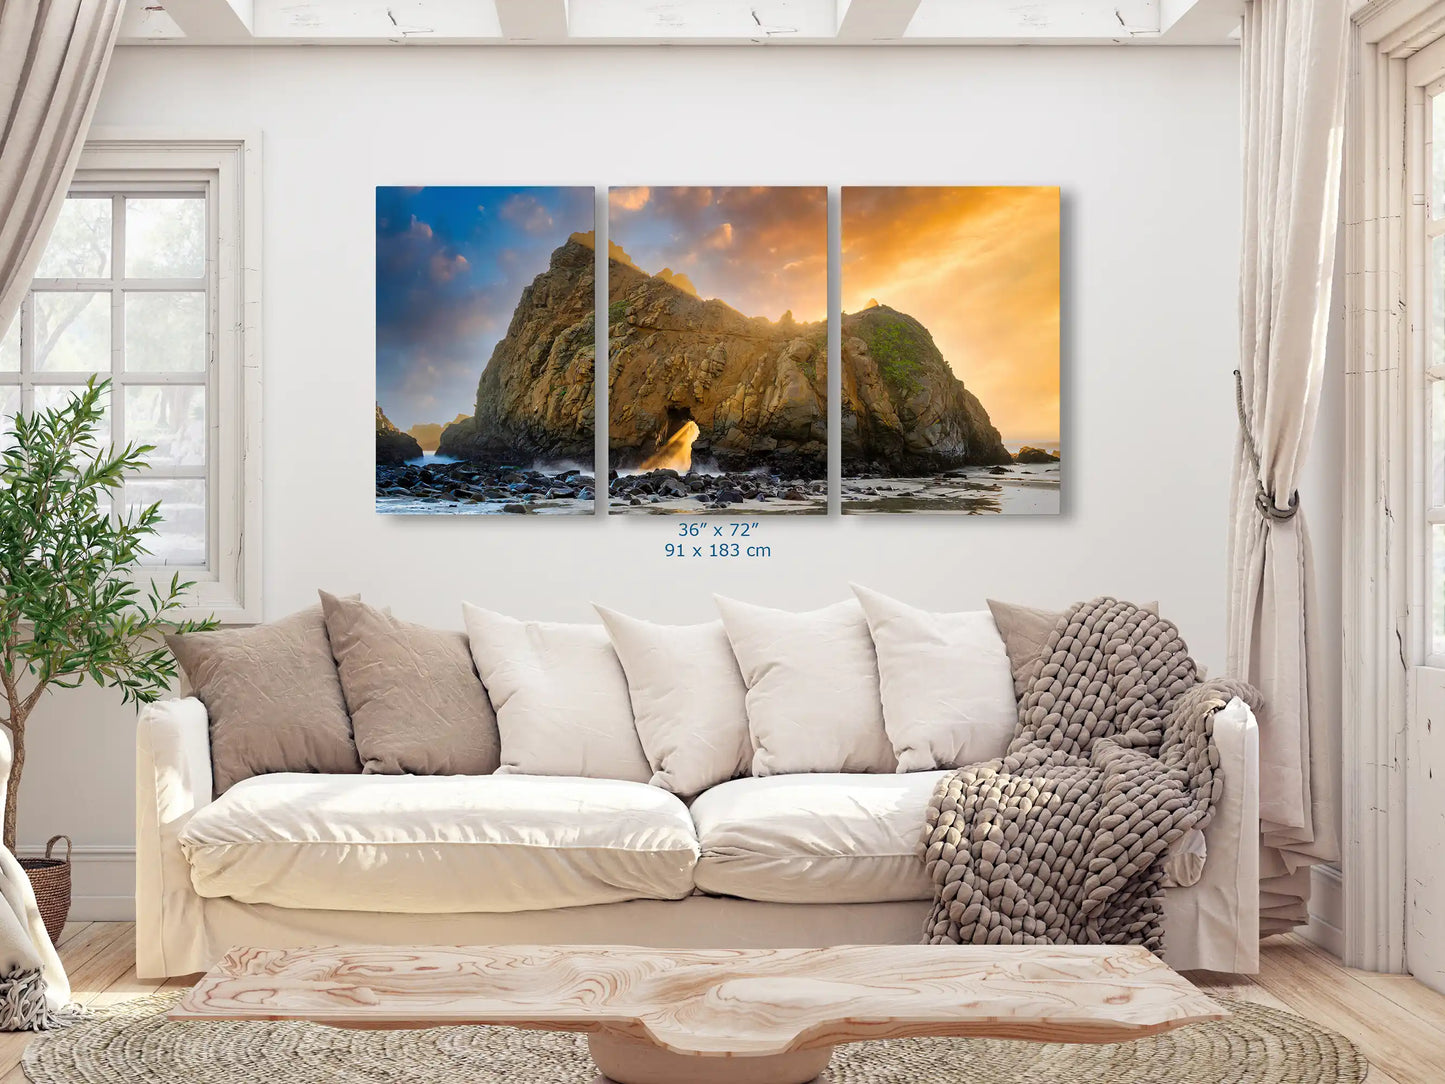 A panoramic 36"x72" canvas in a living room, presenting Keyhole Arch with a sunset, offering a stunning view that stretches across the space.